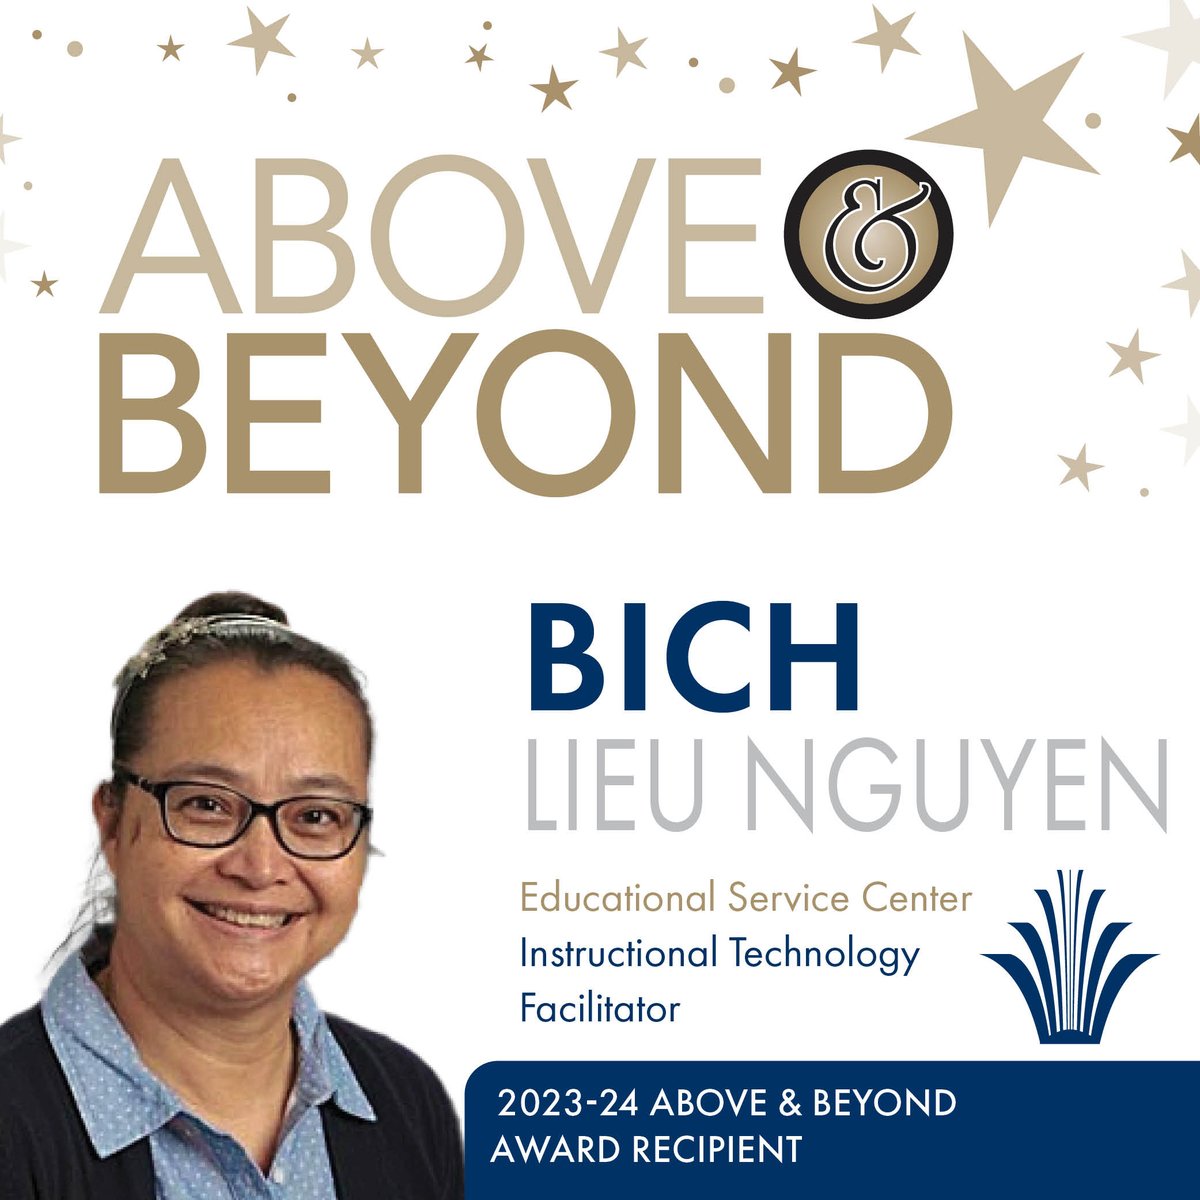 Congratulations to 2023-24 Above & Beyond Awards recipient: Bich Lieu Nguyen! Bich Lieu Nguyen, instructional technology facilitator at the Educational Service Center, is a role model for #AHSchools staff. Read more about how Bich has gone Above & Beyond: bit.ly/440iFBj